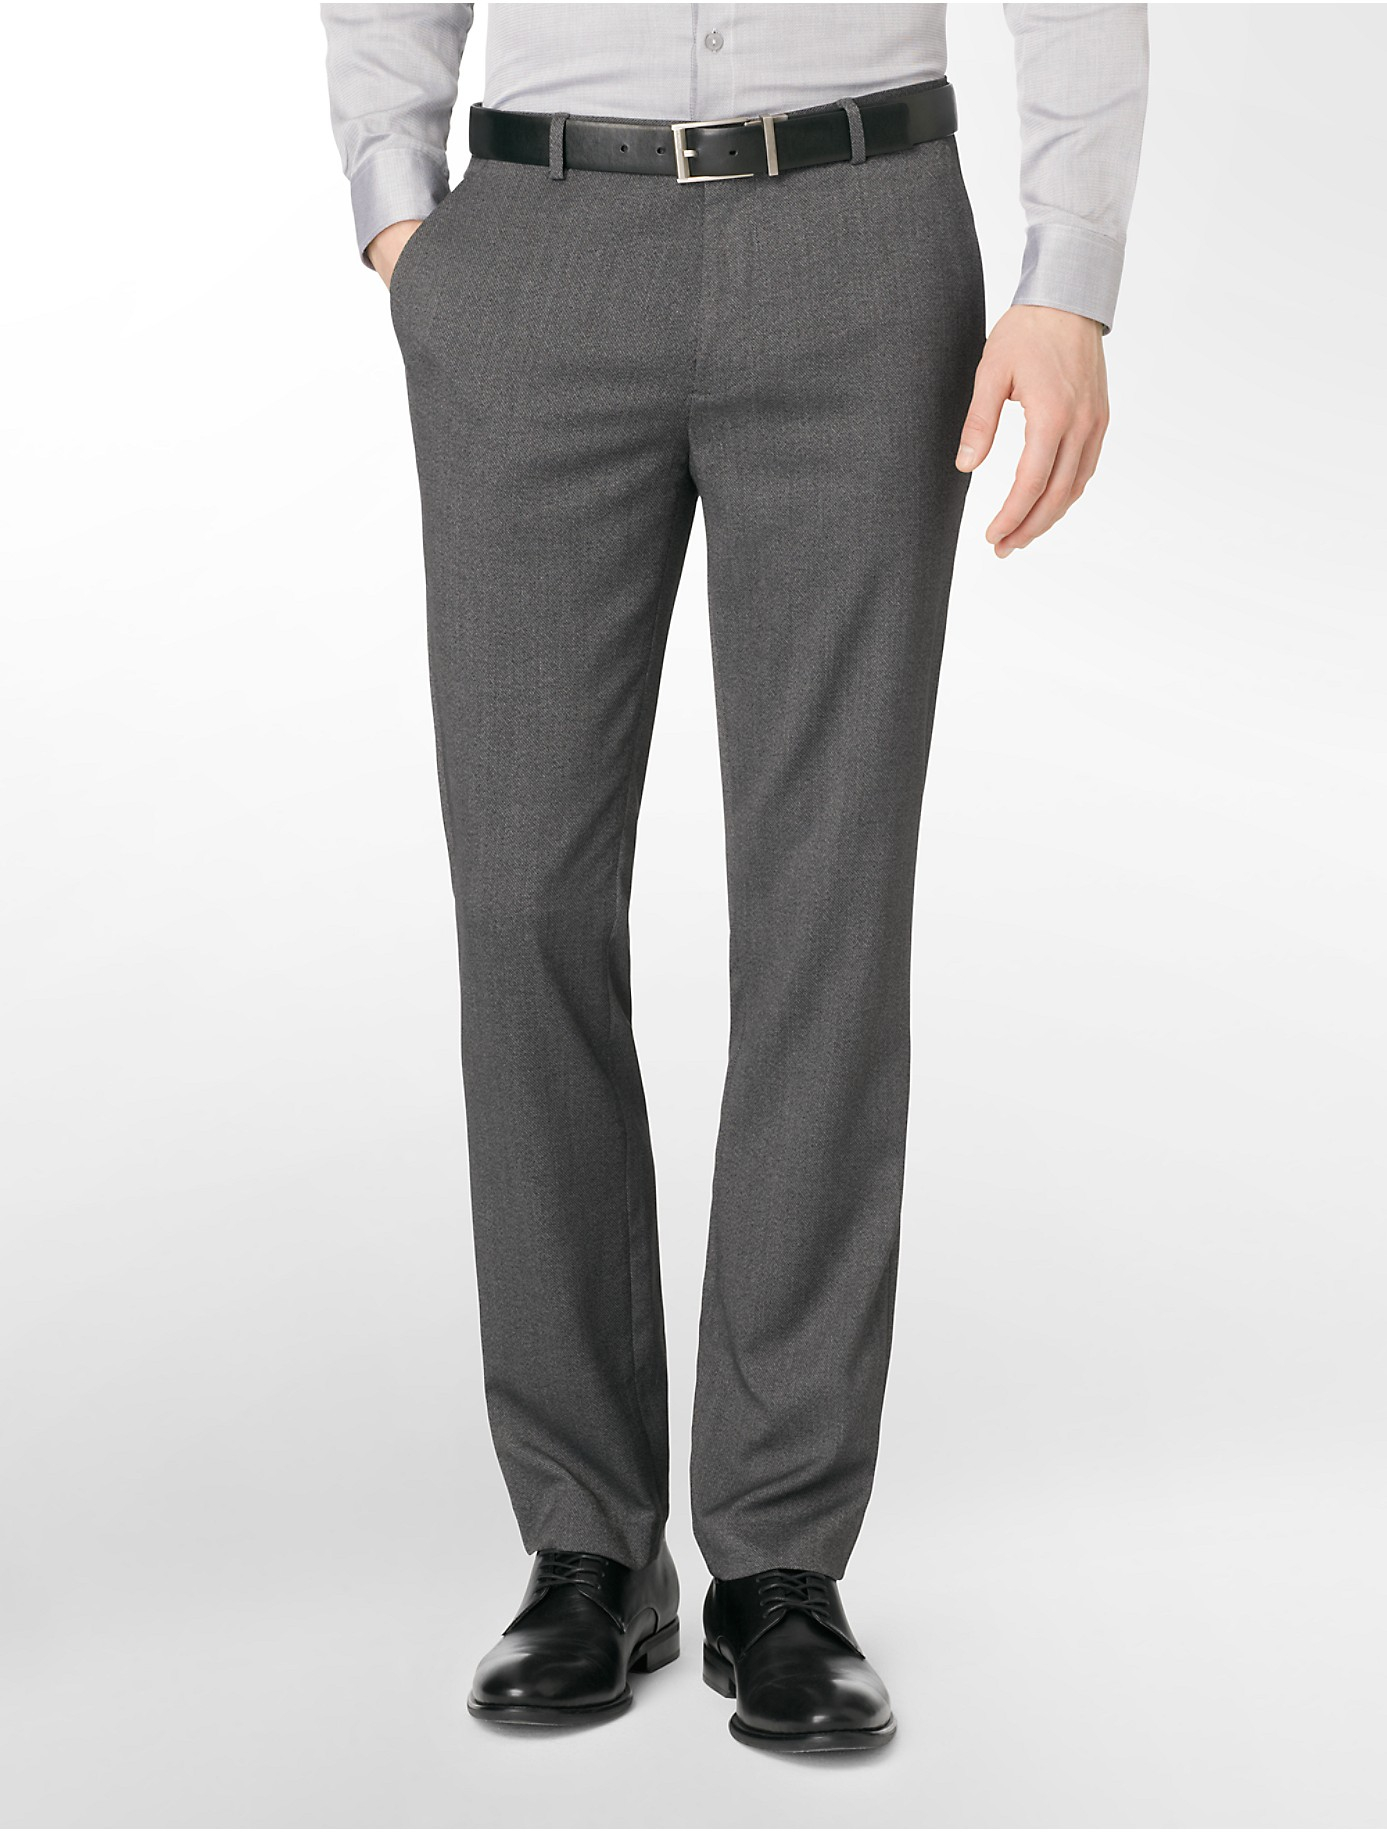 Calvin klein White Label Slim Fit Heathered Twill Dress Pants in Gray ...